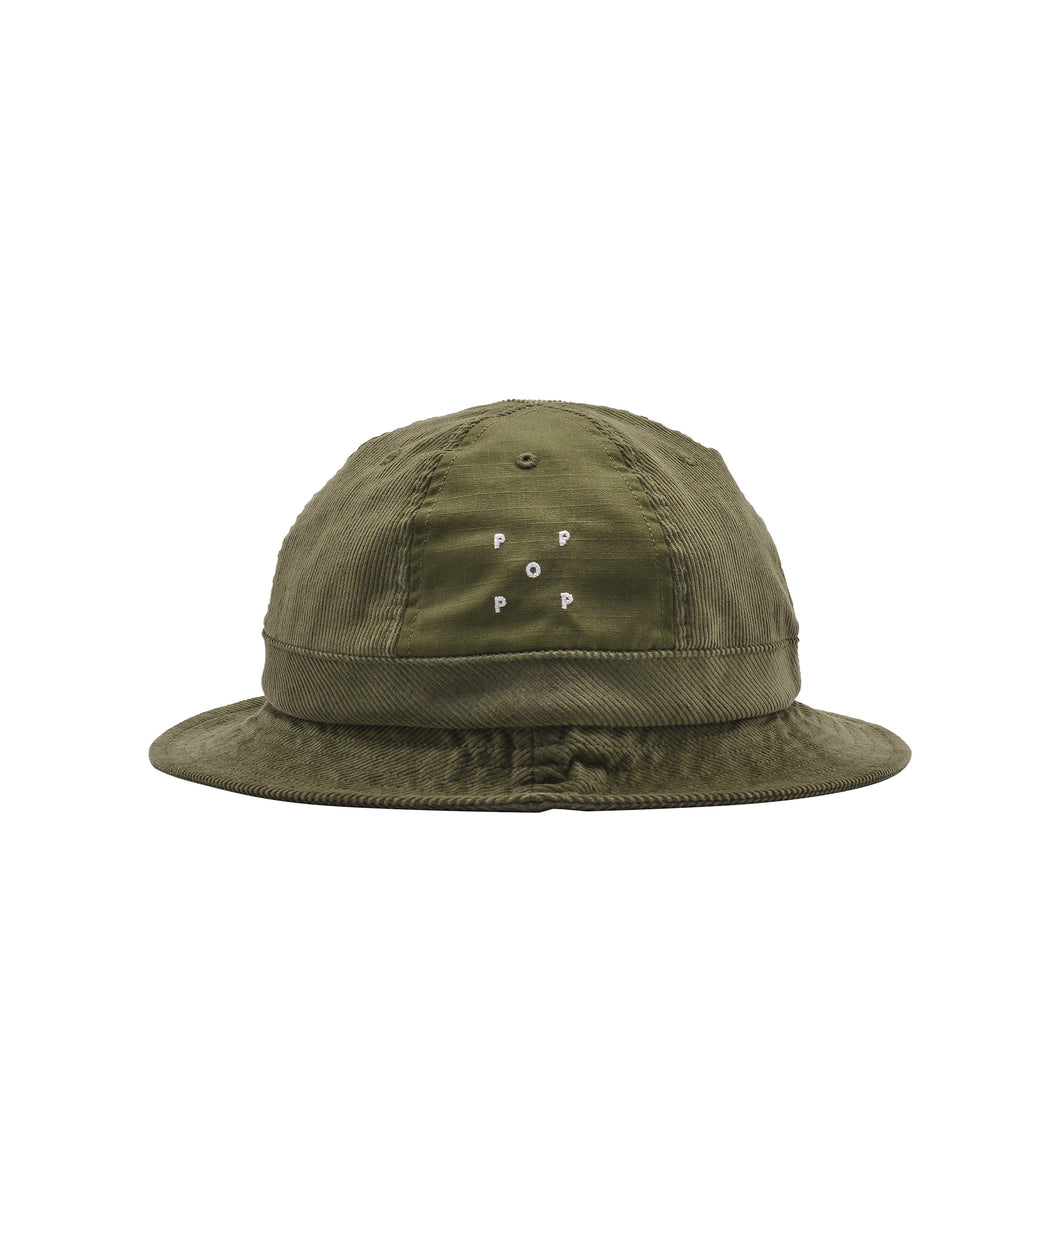 BELL HAT - OLIVINE RIPSTOP/CORD